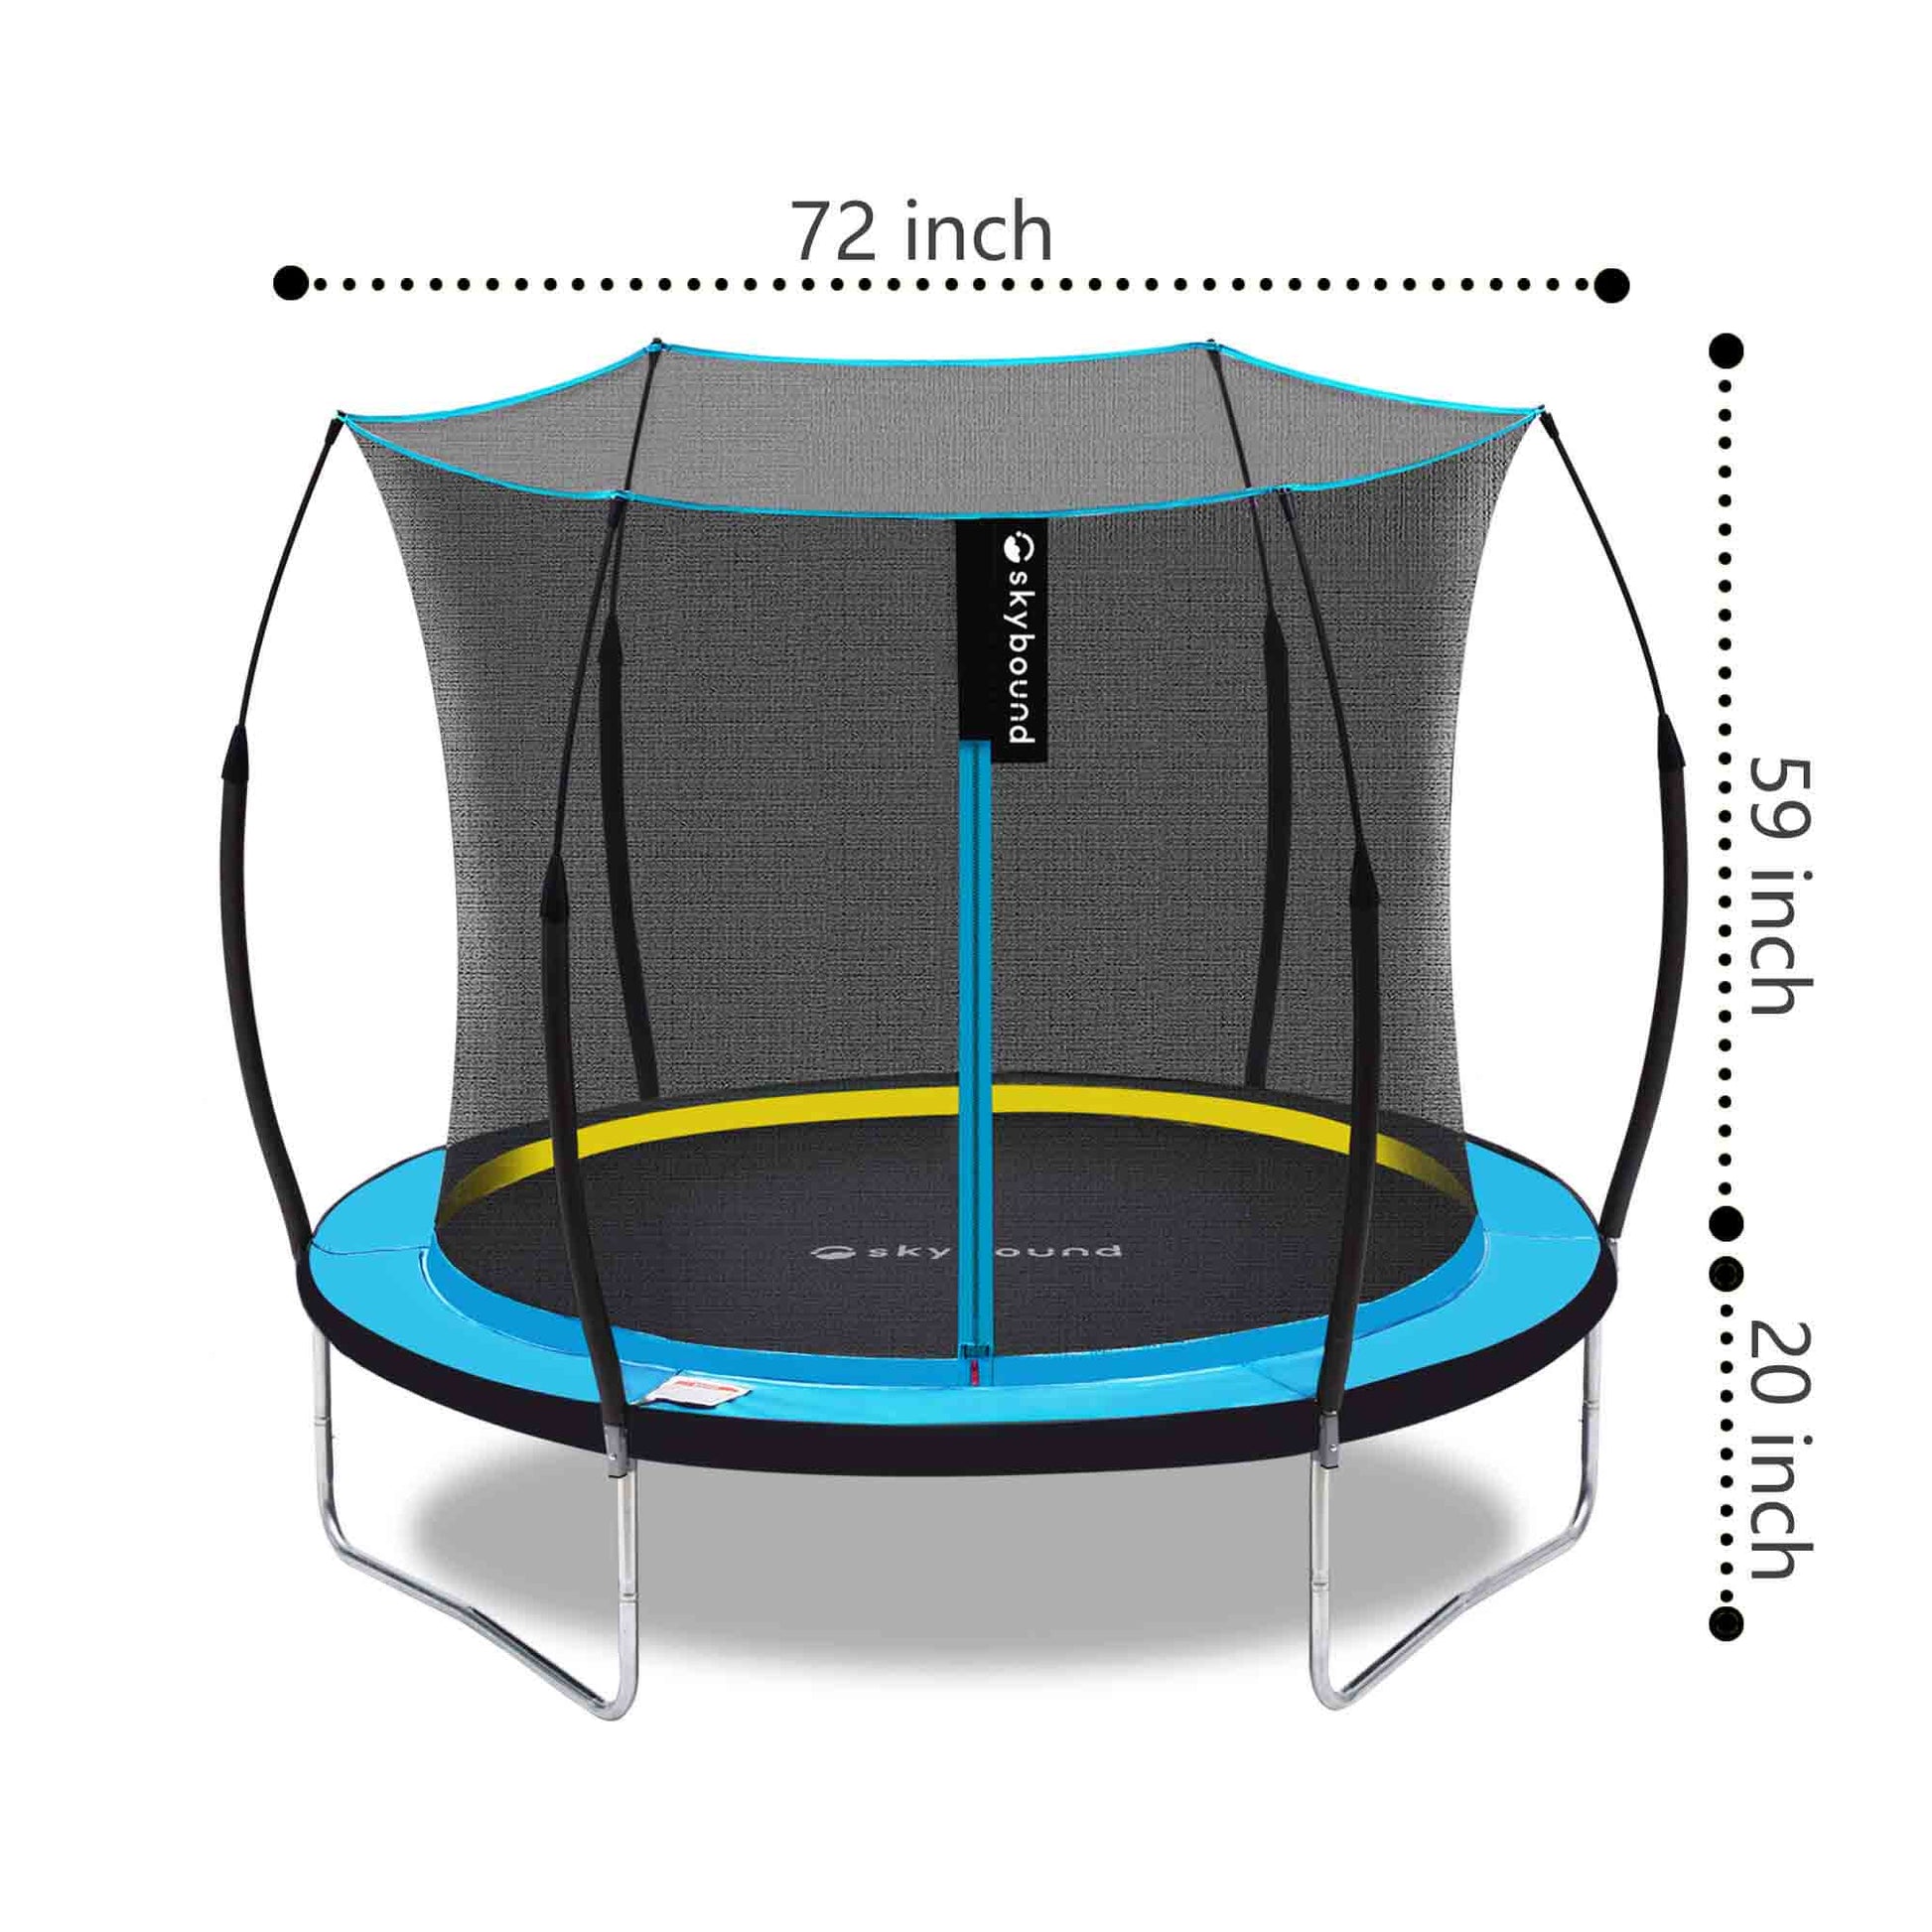 6ft trampoline size: 72inch × 79inch